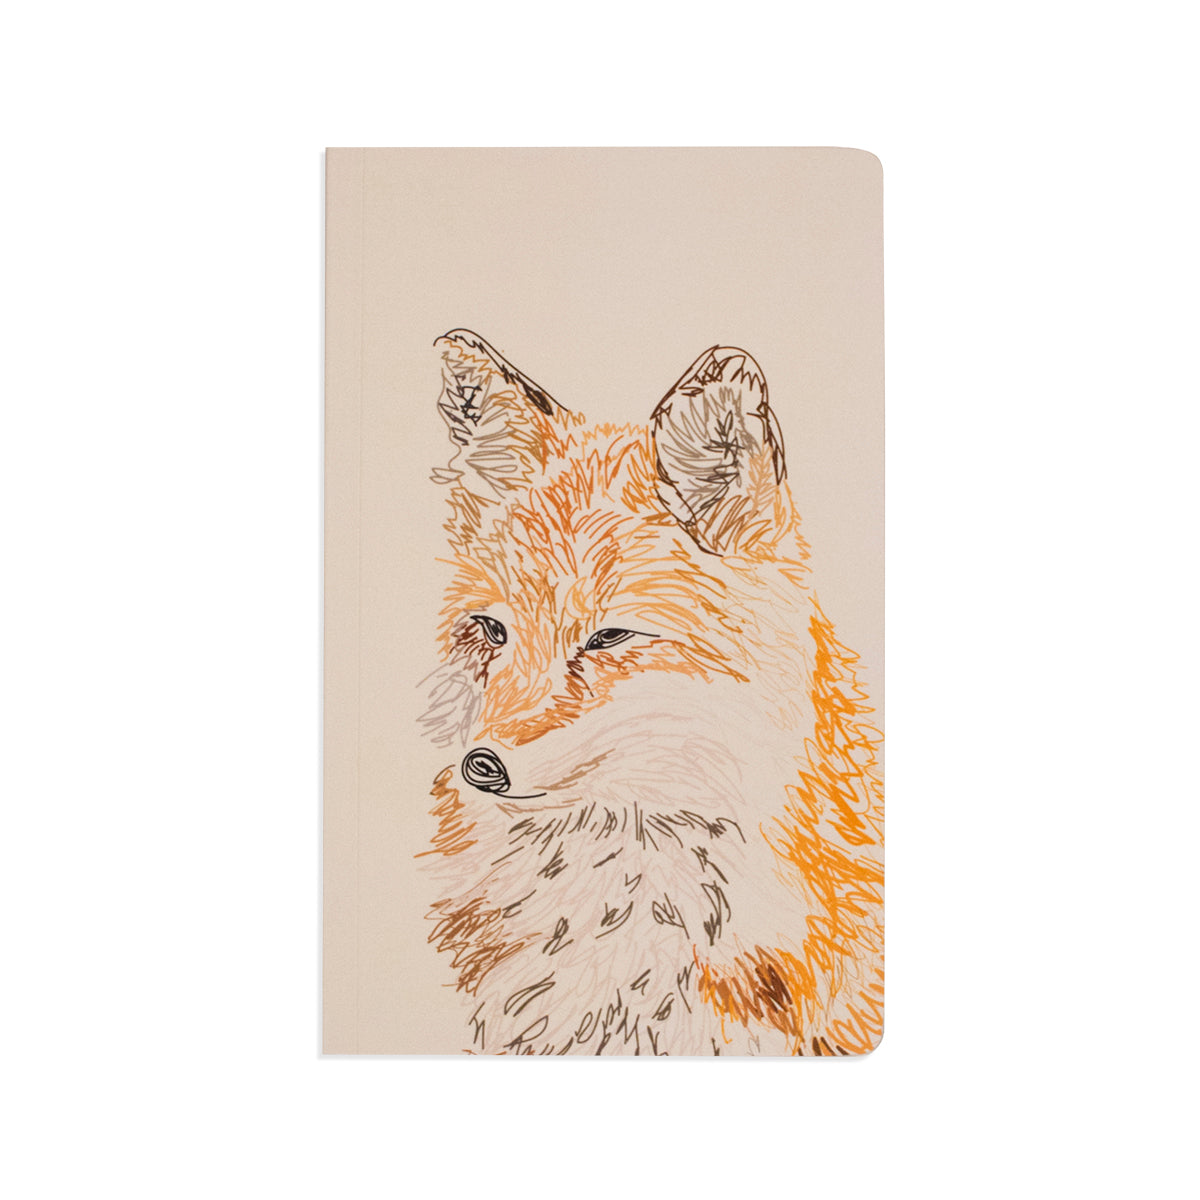 5" x 8.25" soft cover notebook in white featuring large hand sketched fox illustration in the middle